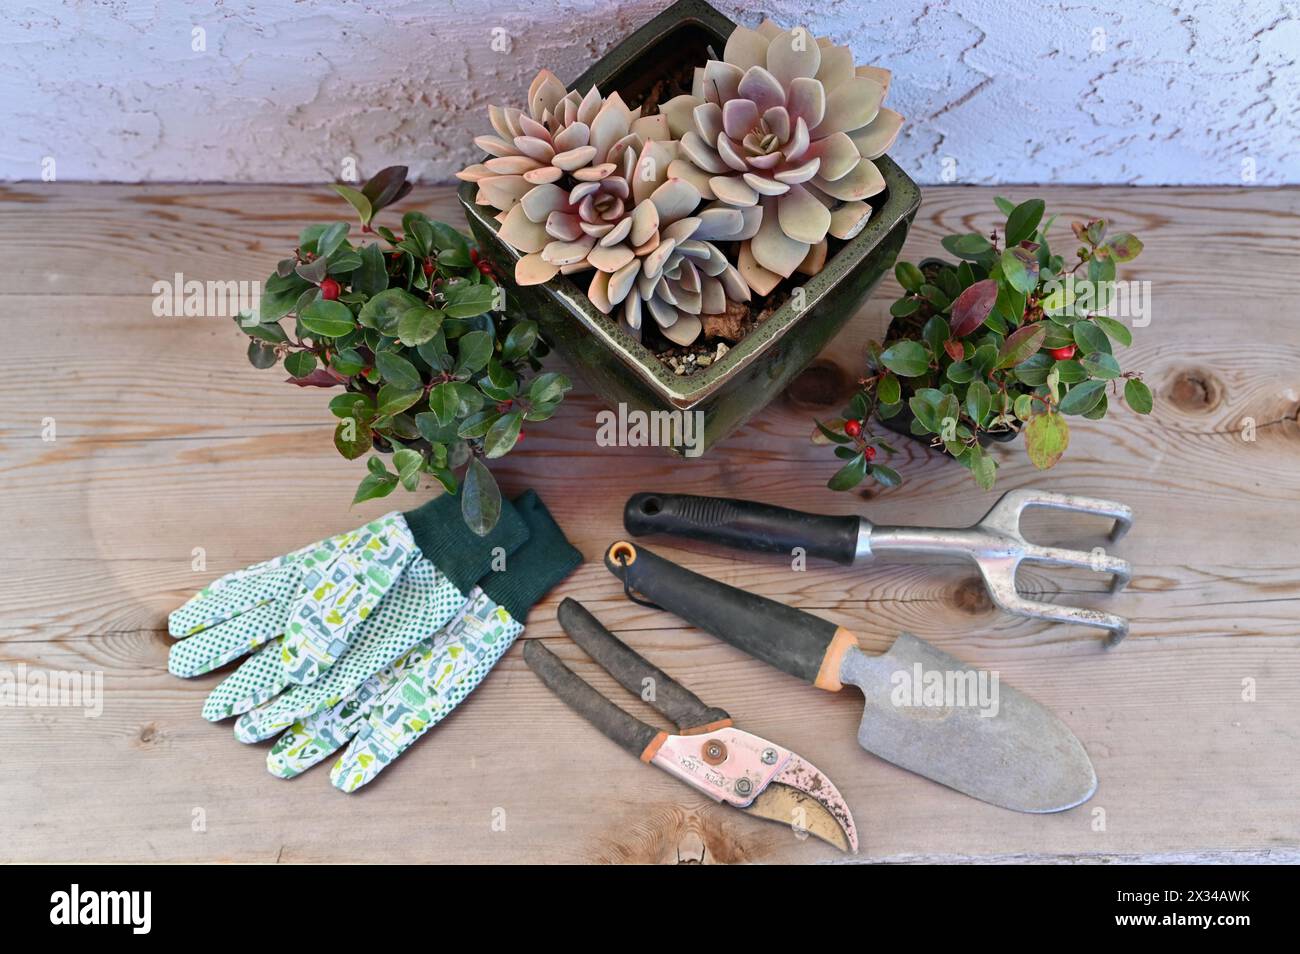 Garden potting bench with yard tools for yard work Stock Photo